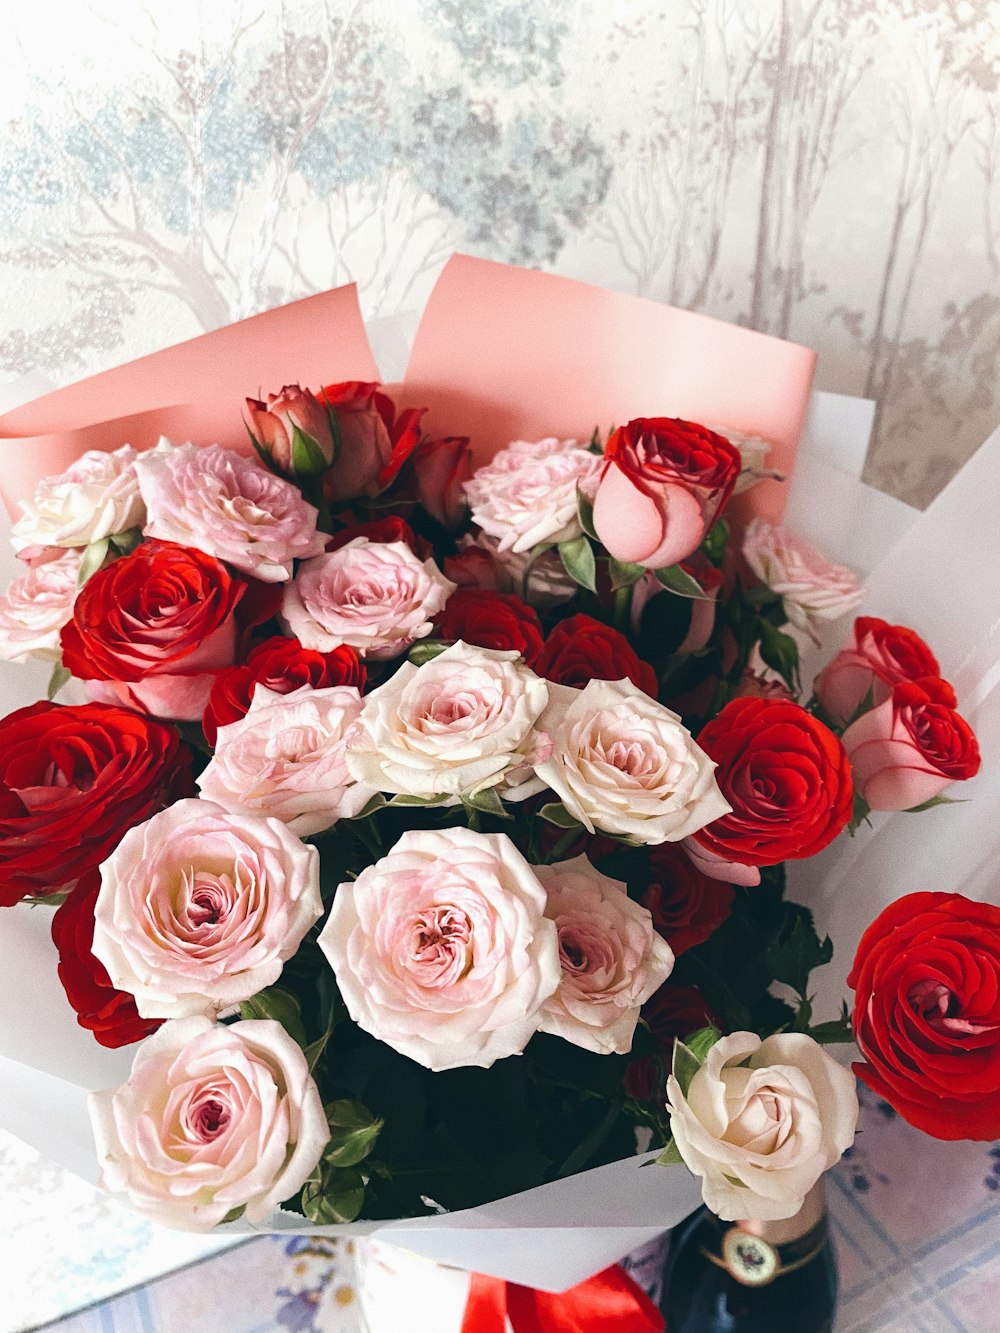 1000+ Rose Bouquet Pictures | Download Free Images on Unsplash